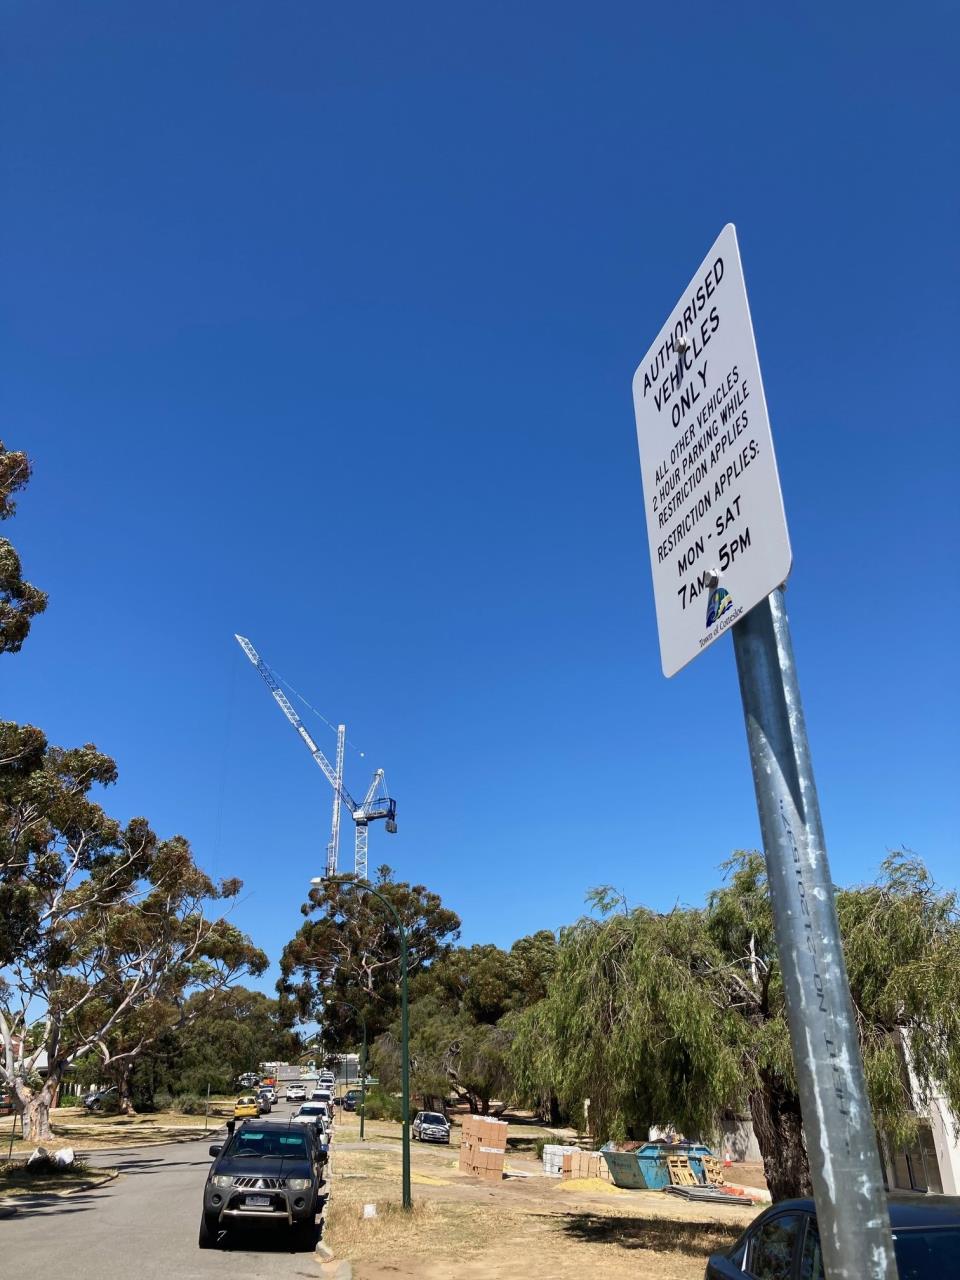 TEMPORARY PARKING RESTRICTIONS IN EAST COTTESLOE